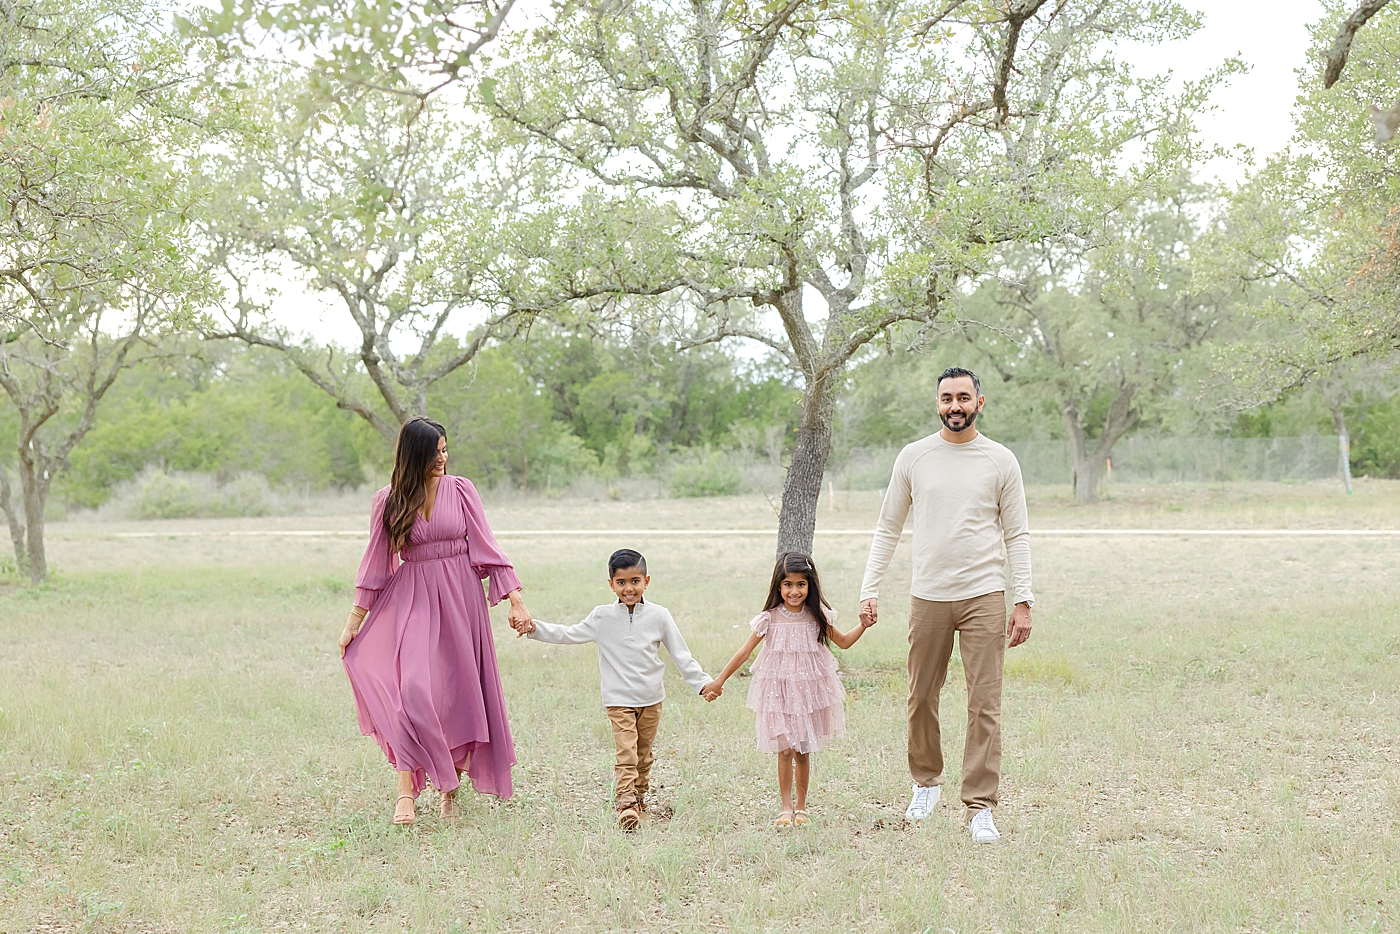 Family holding hands walking the park | Image by Sana Ahmed Photography